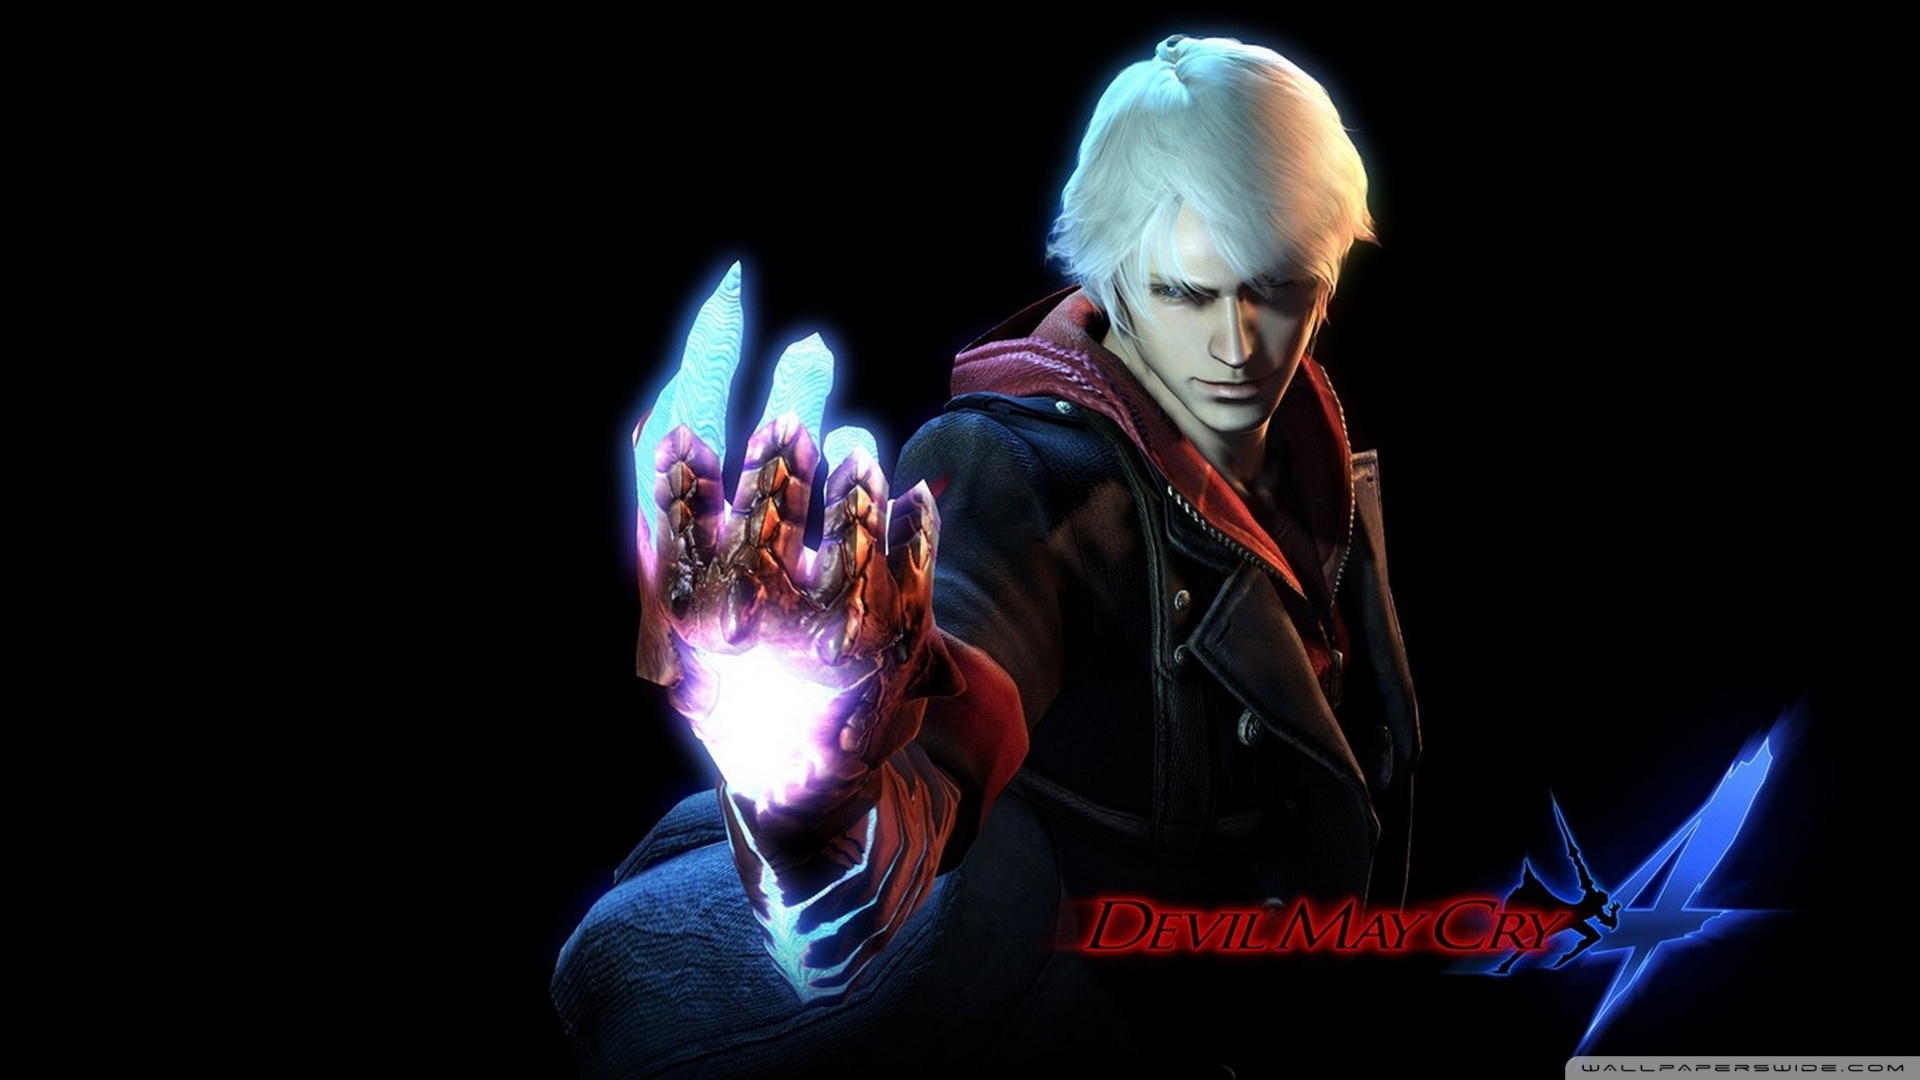 Devil May Cry 4 Wallpaper 1920x1080